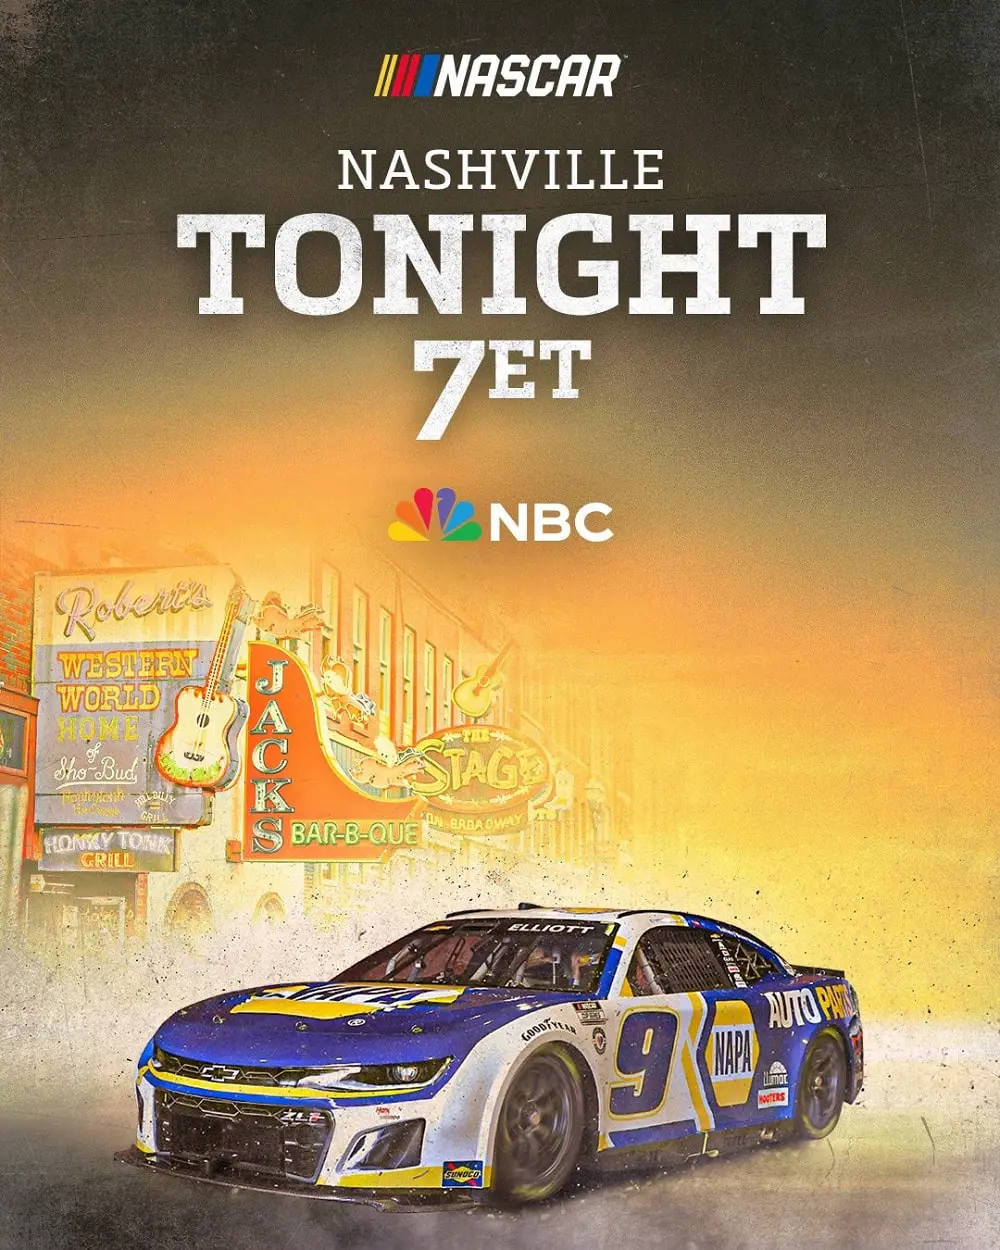 NASCAR on NBC broadcasted the Ally 400 race on June 26